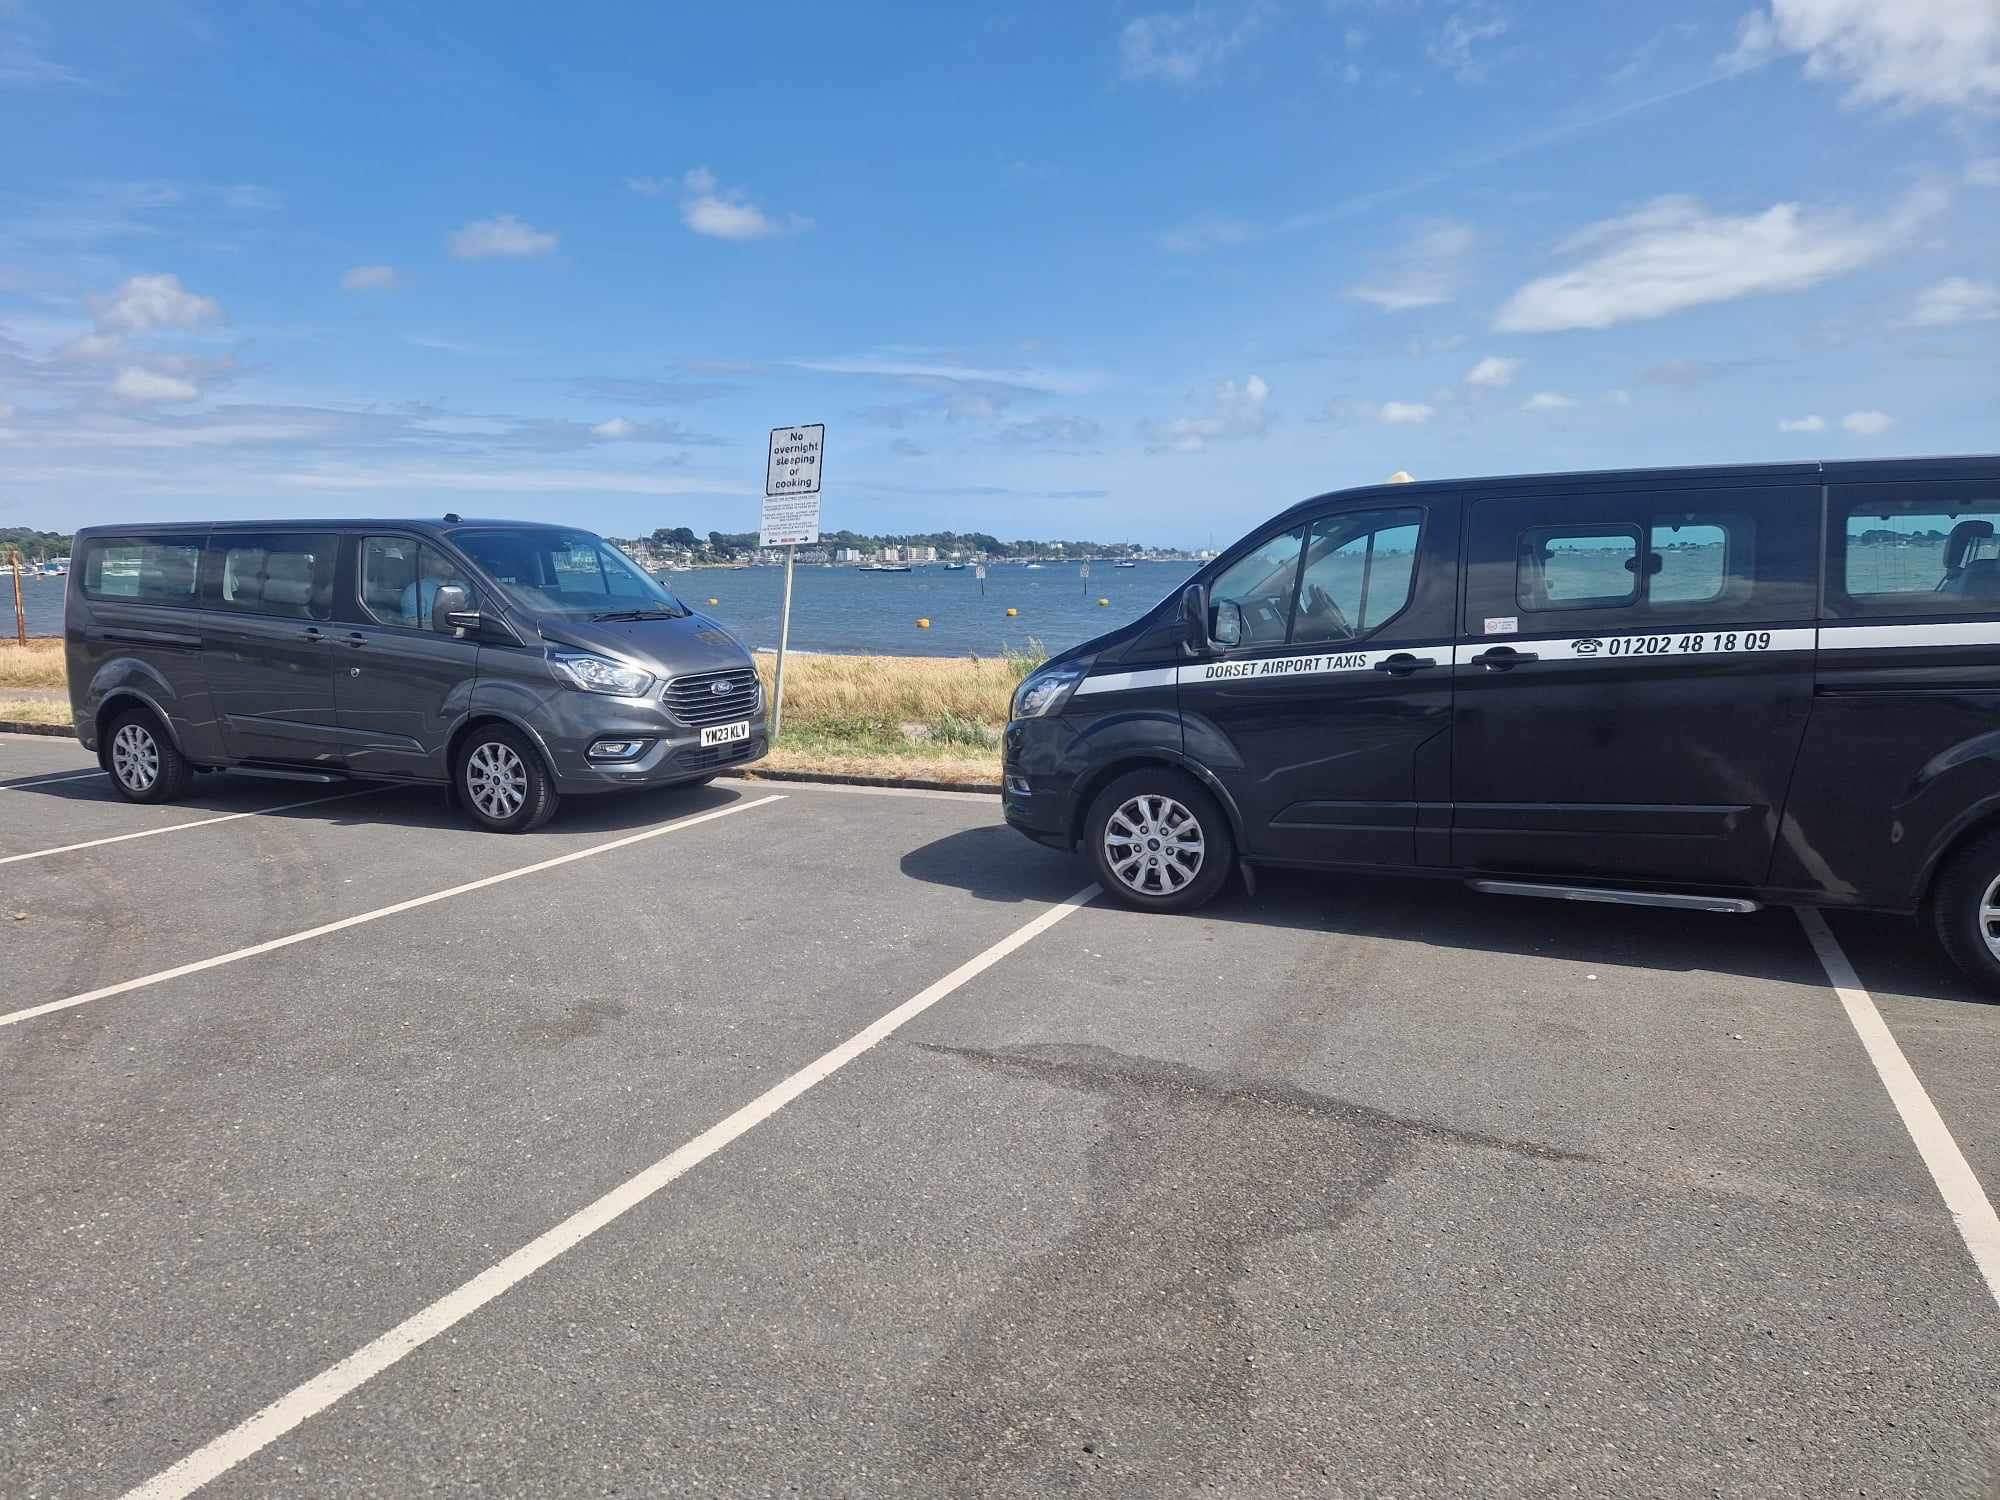 About Dorset Airport Taxi